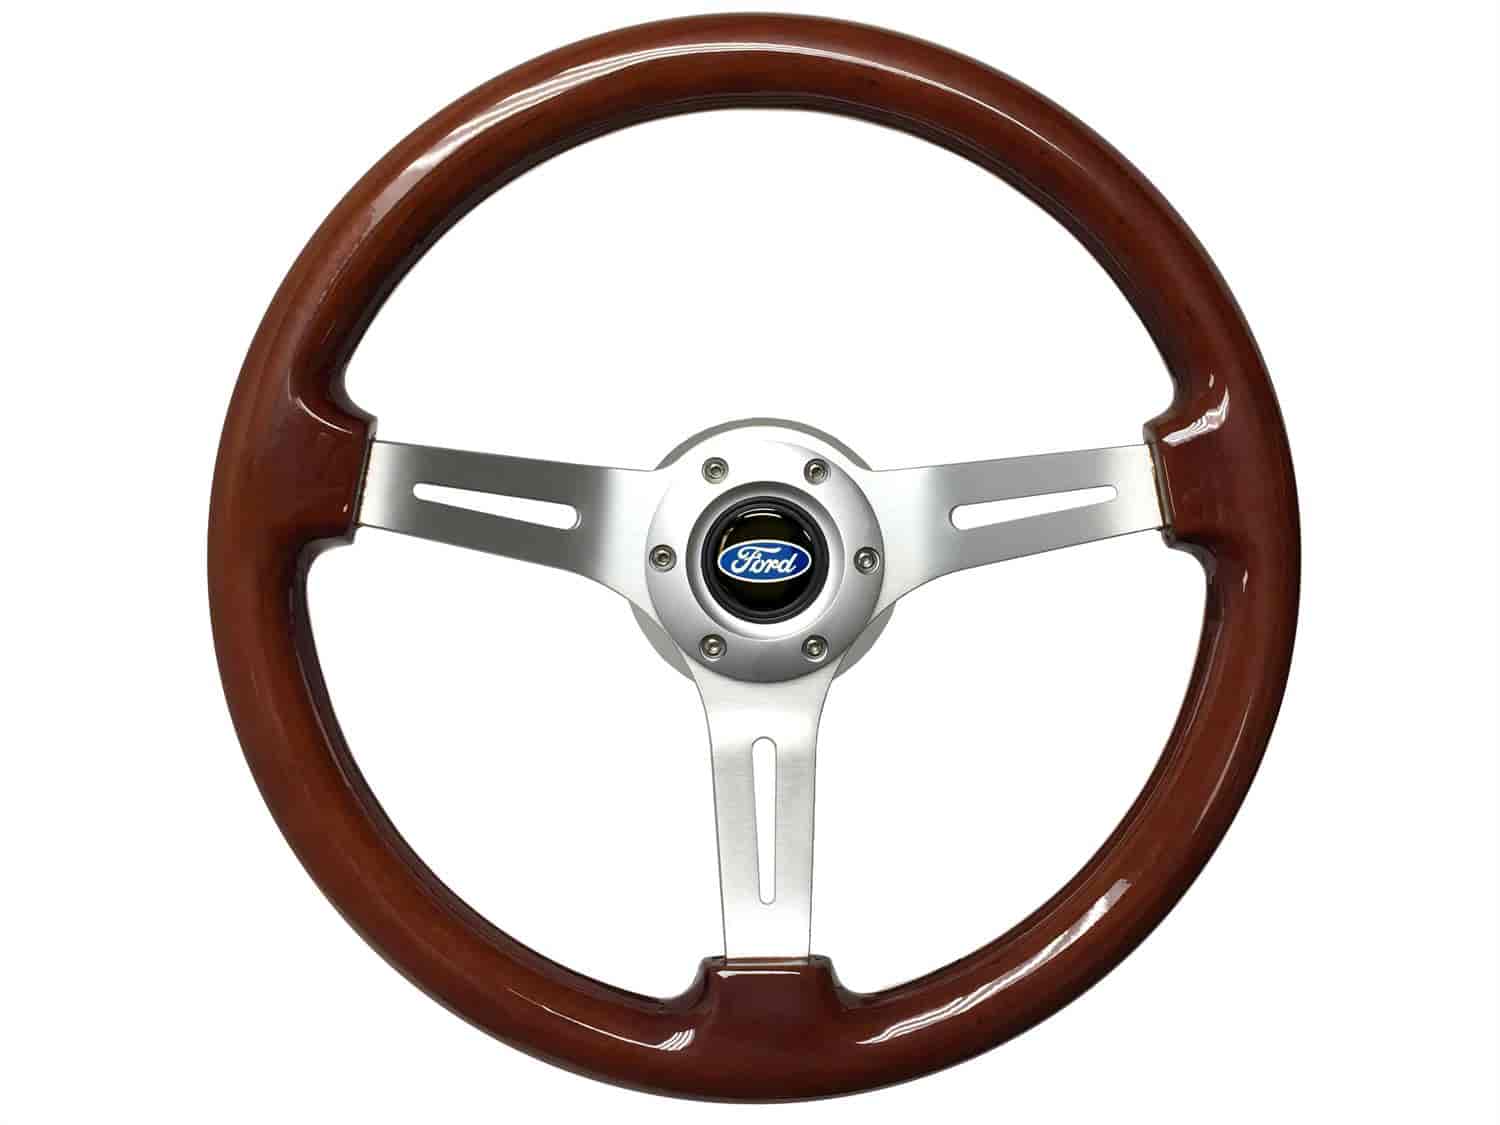 S6 Sport Steering Wheel Kit for 1964-1972 Ford/Mercury, 14 in. Diameter, Mahogany Wood Grip, with 6-Bolt Adapter and Horn Button